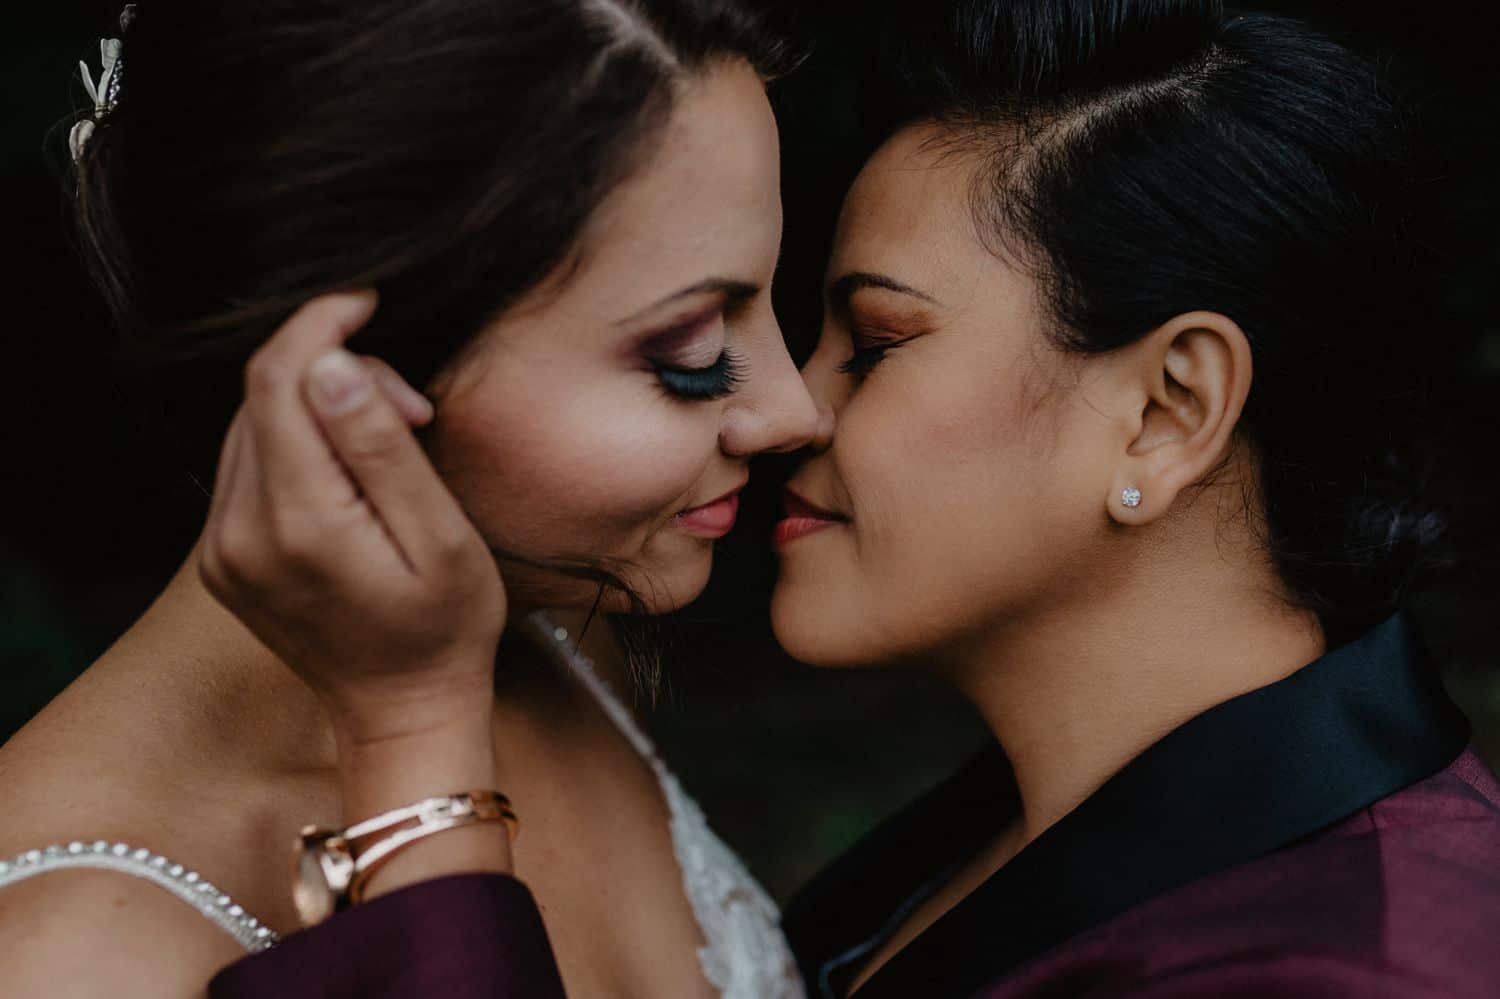 Two women move close for a kiss on their wedding day